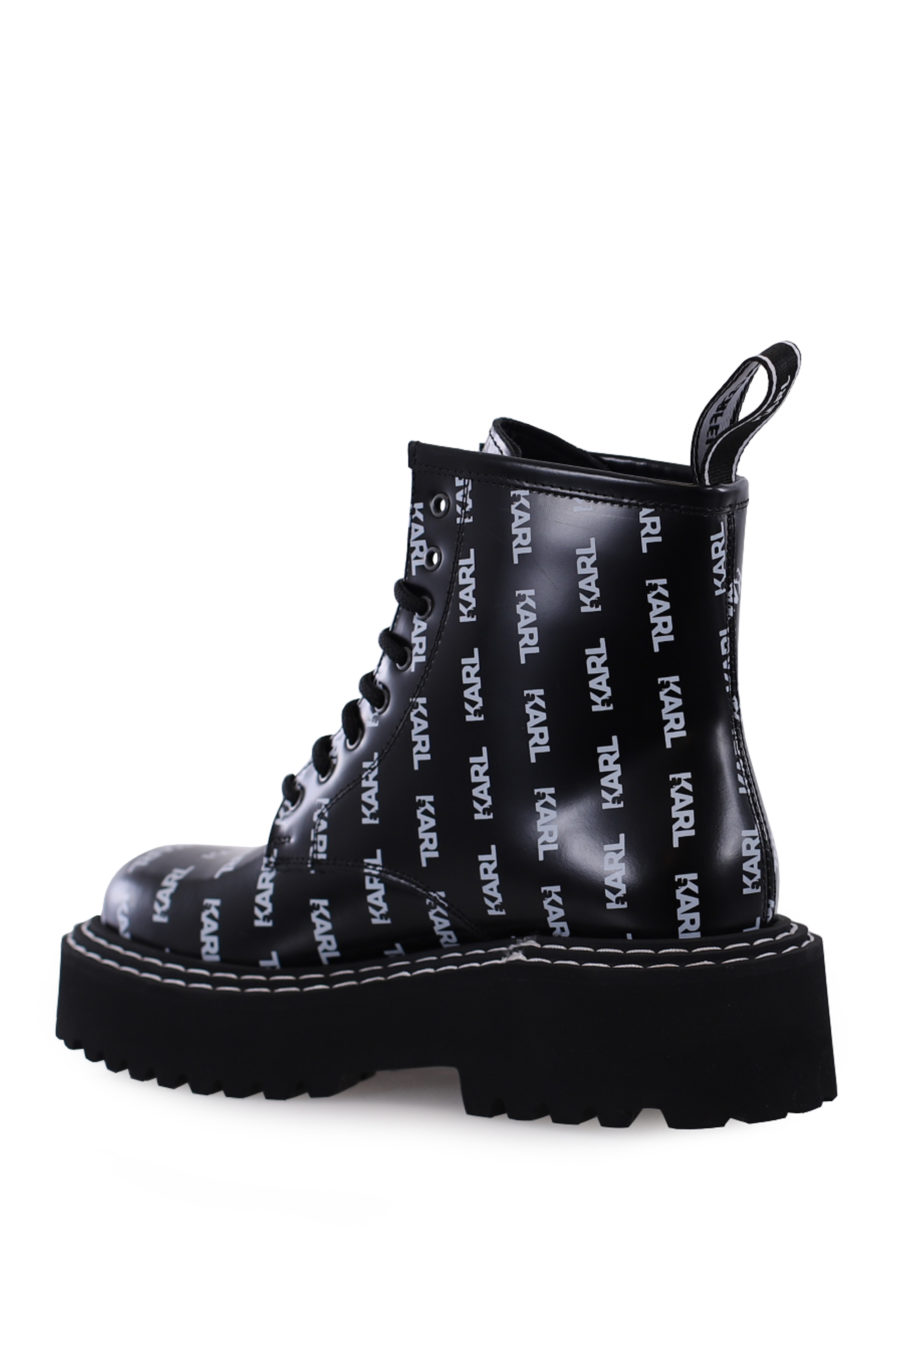 Black ankle boots with multiple logo - IMG 0180